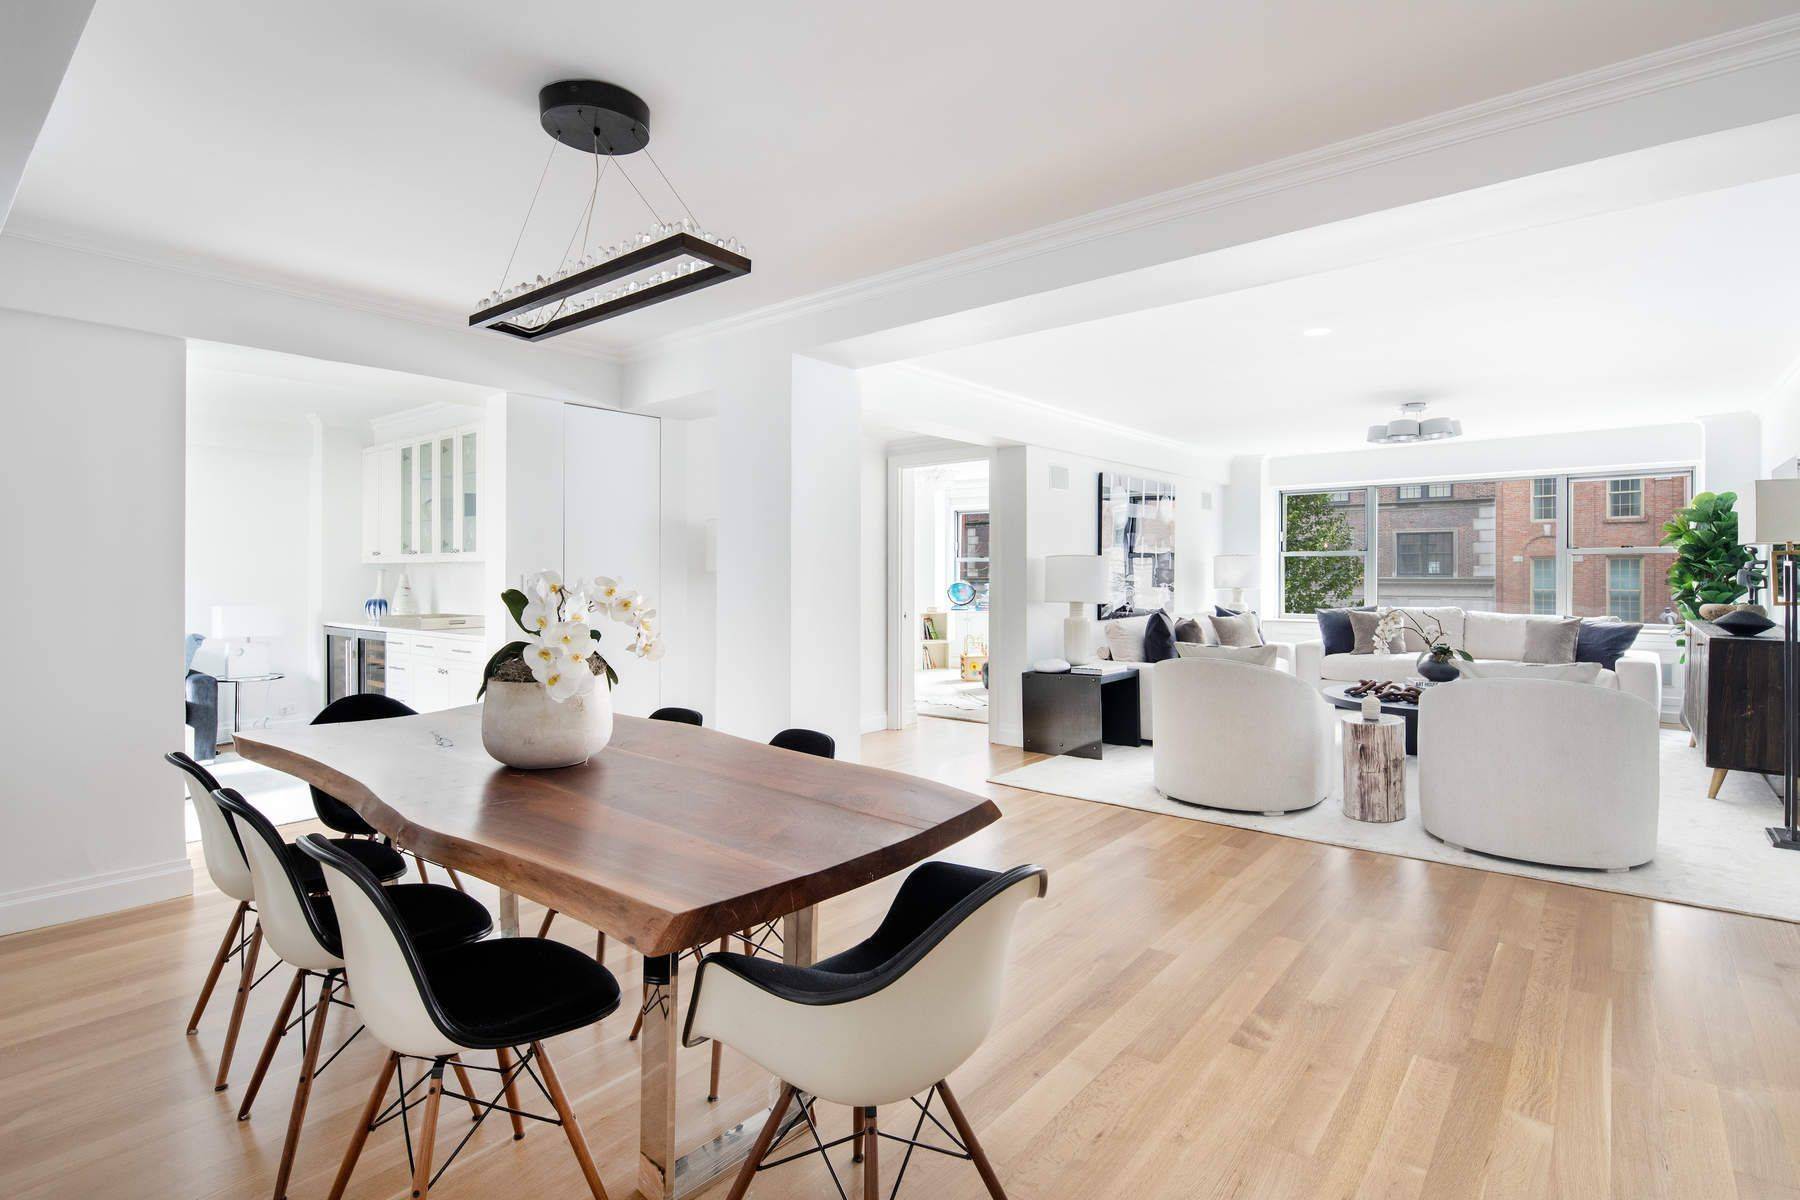 Newly completed and gorgeously renovated to the highest standards, 4C in the luxurious full service cooperative 45 East 72nd Street is a jewel of a home reserved for the most ...